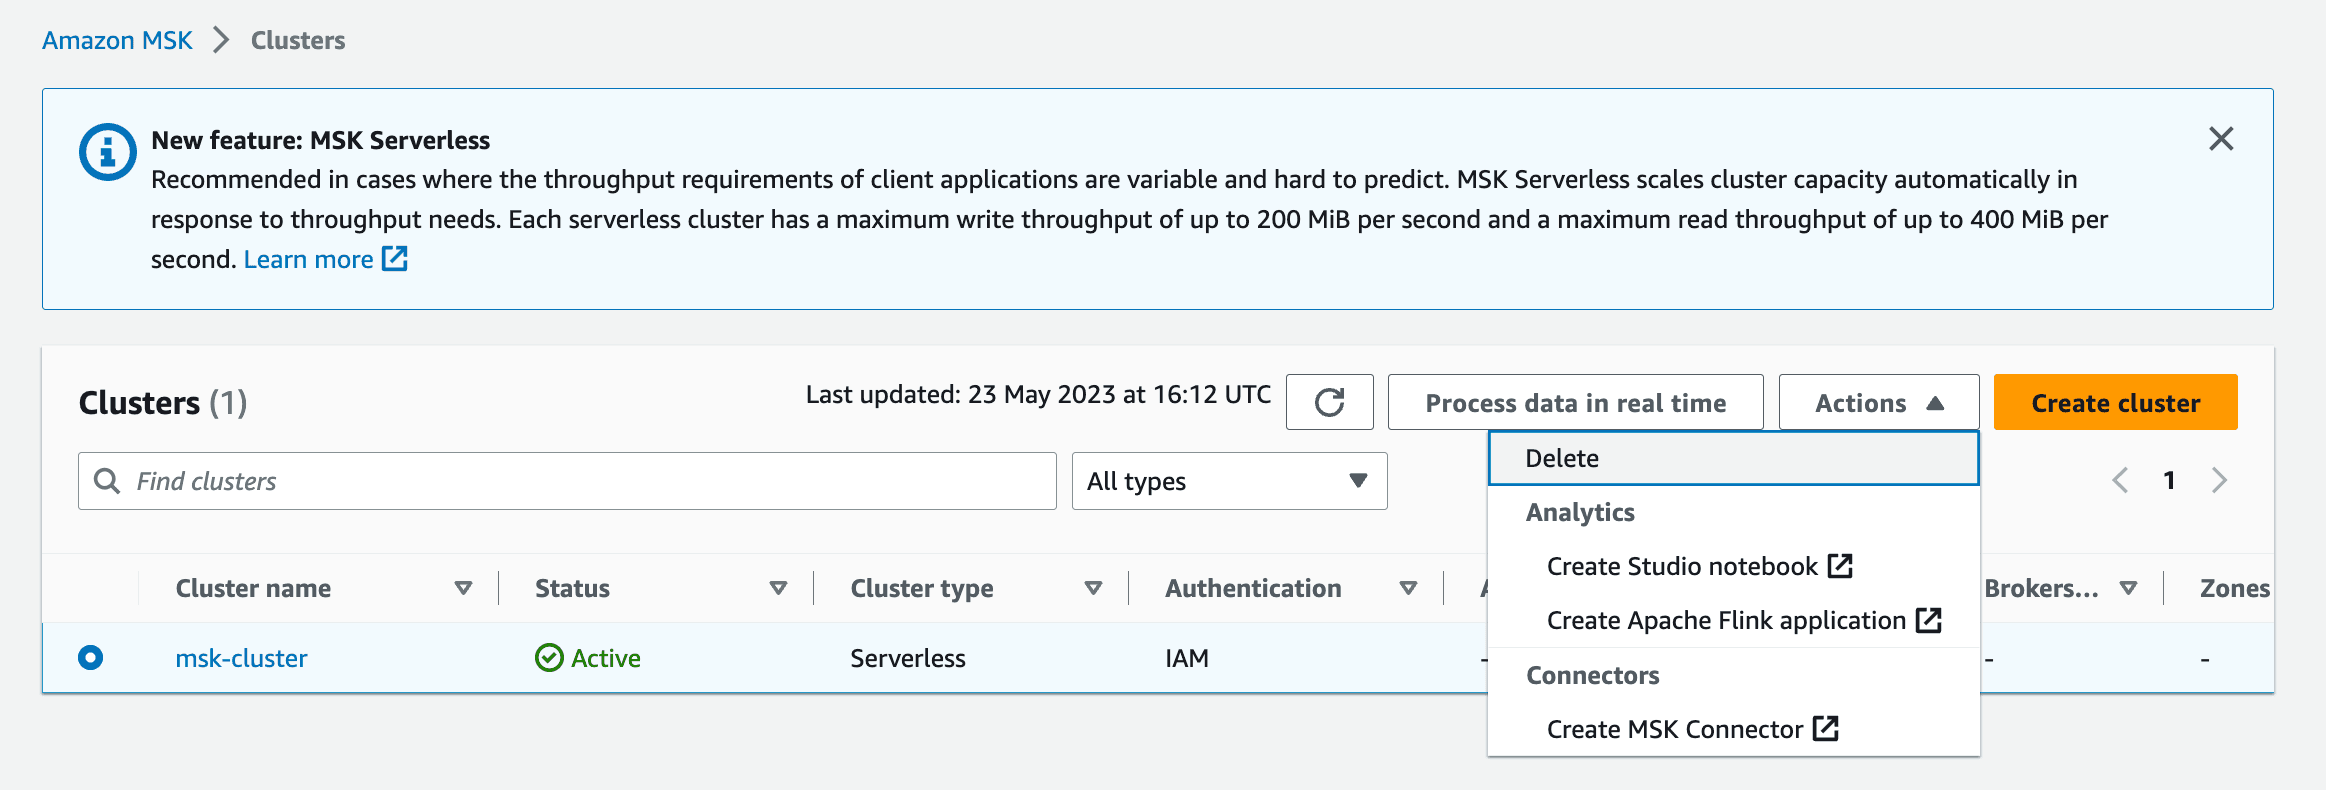 'Delete' under 'Actions' in the MSK console